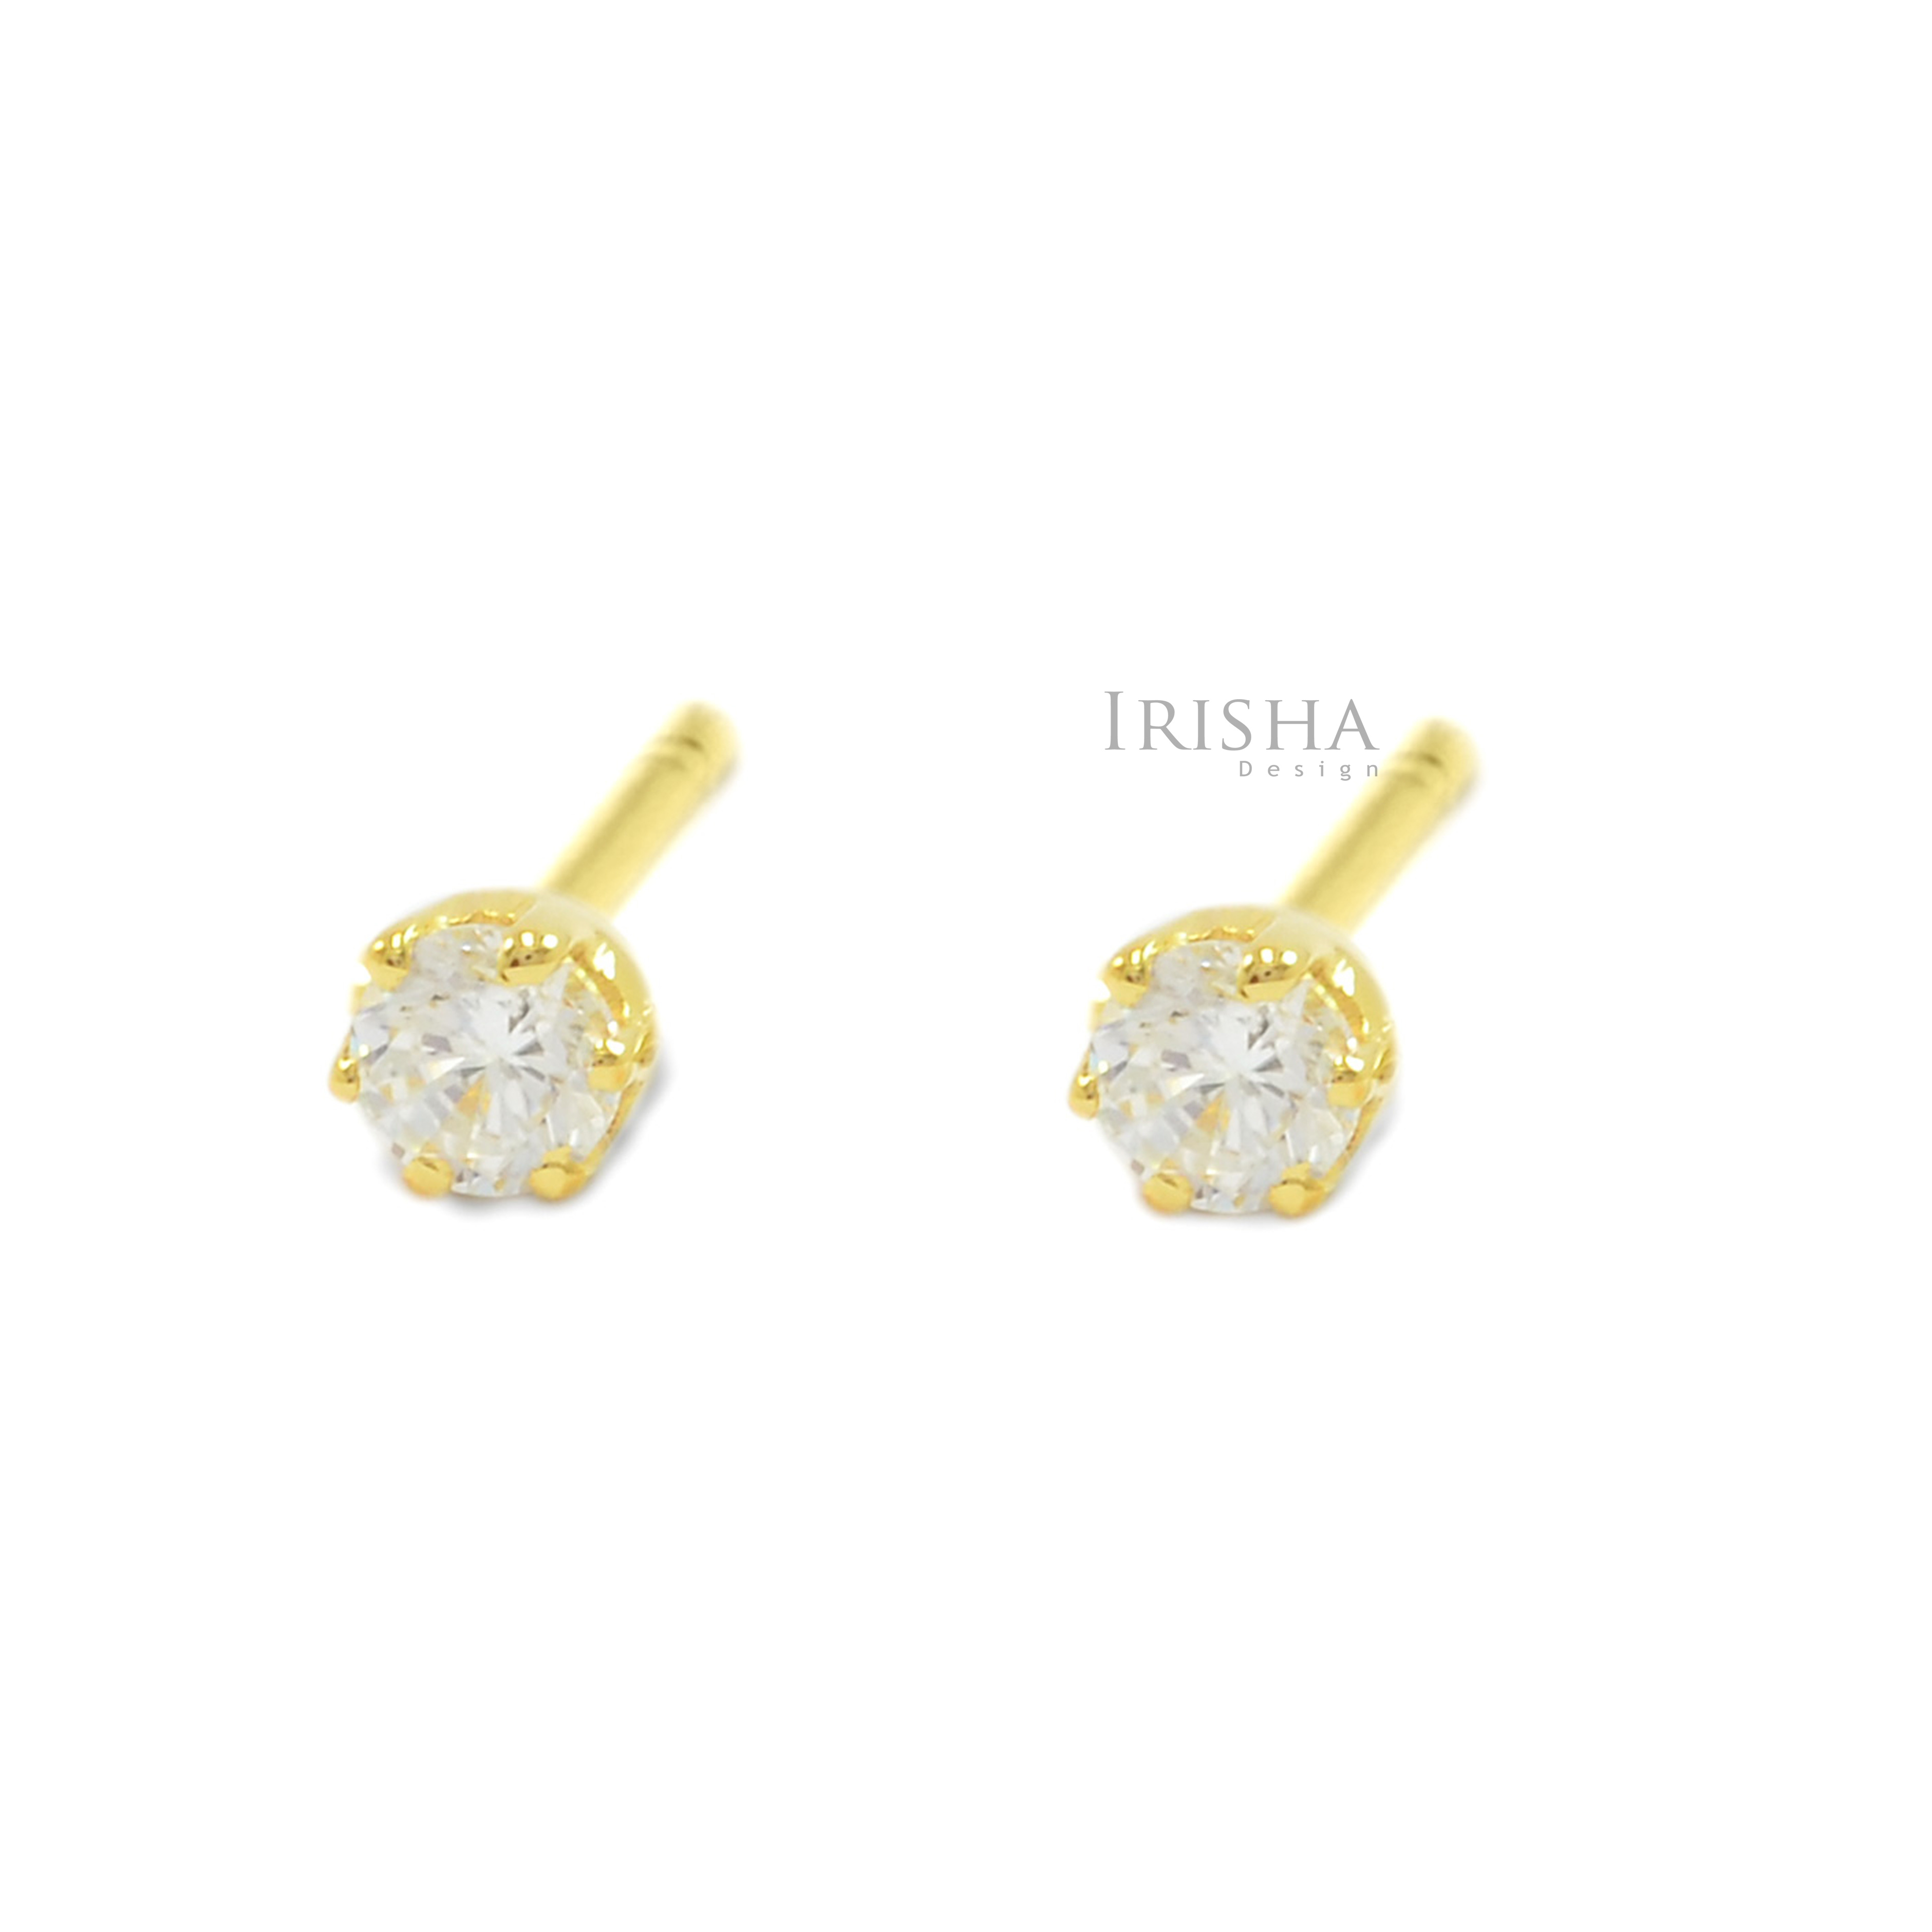 14K Gold 0.22 Ct. Solitaire Genuine Diamond 6 Prong Studs Earrings Fine Jewelry